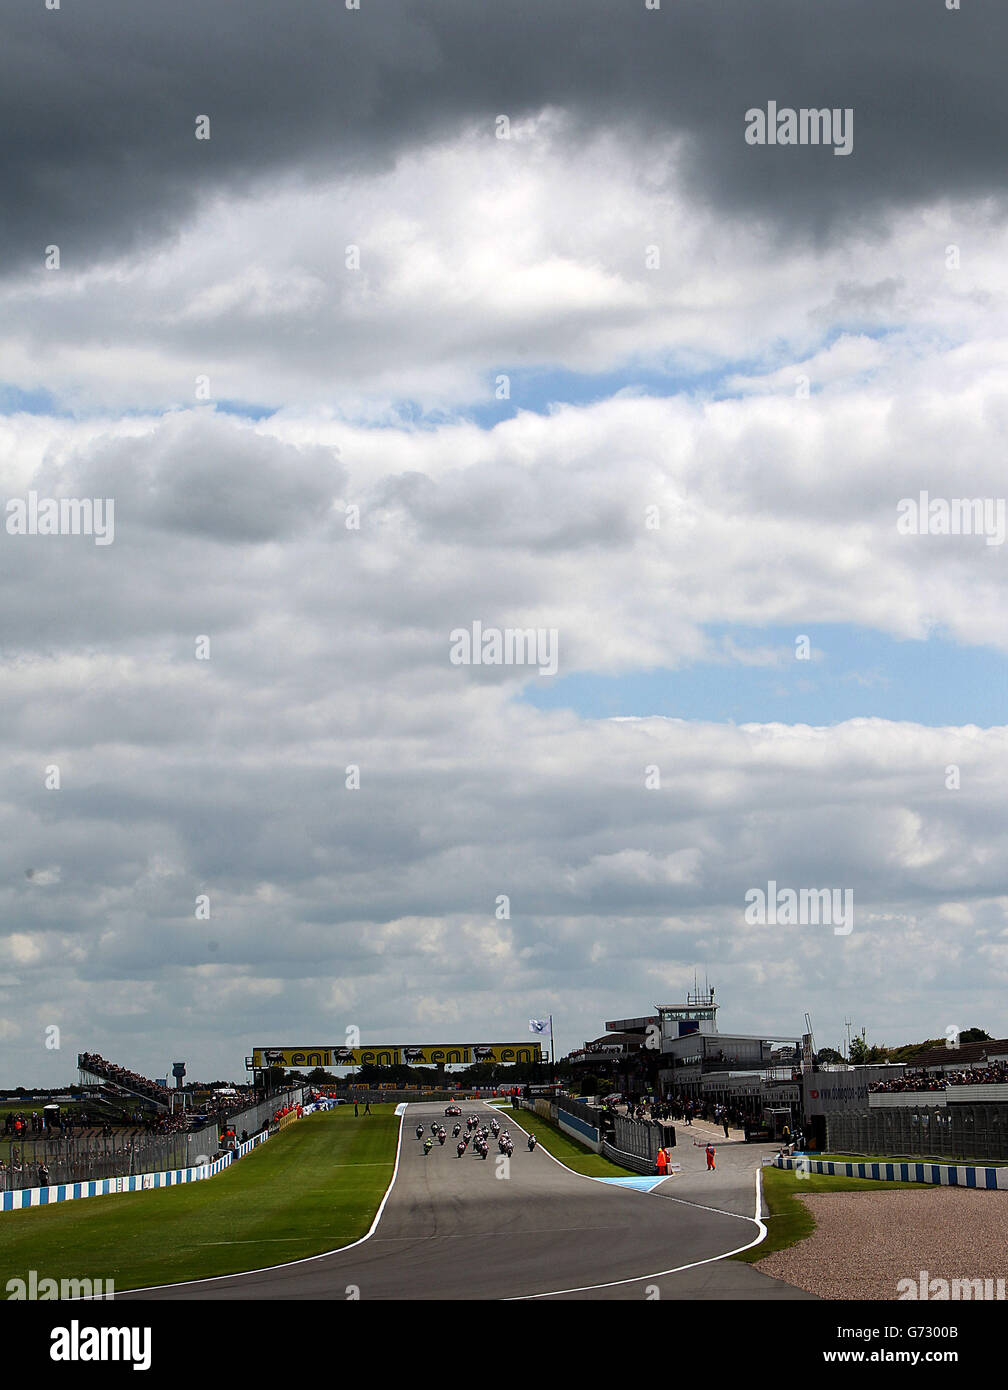 Riders head down towards the first turn during the first race during round 5 of the Superbikes FIM World Championship at Donington Park, Donington. Stock Photo